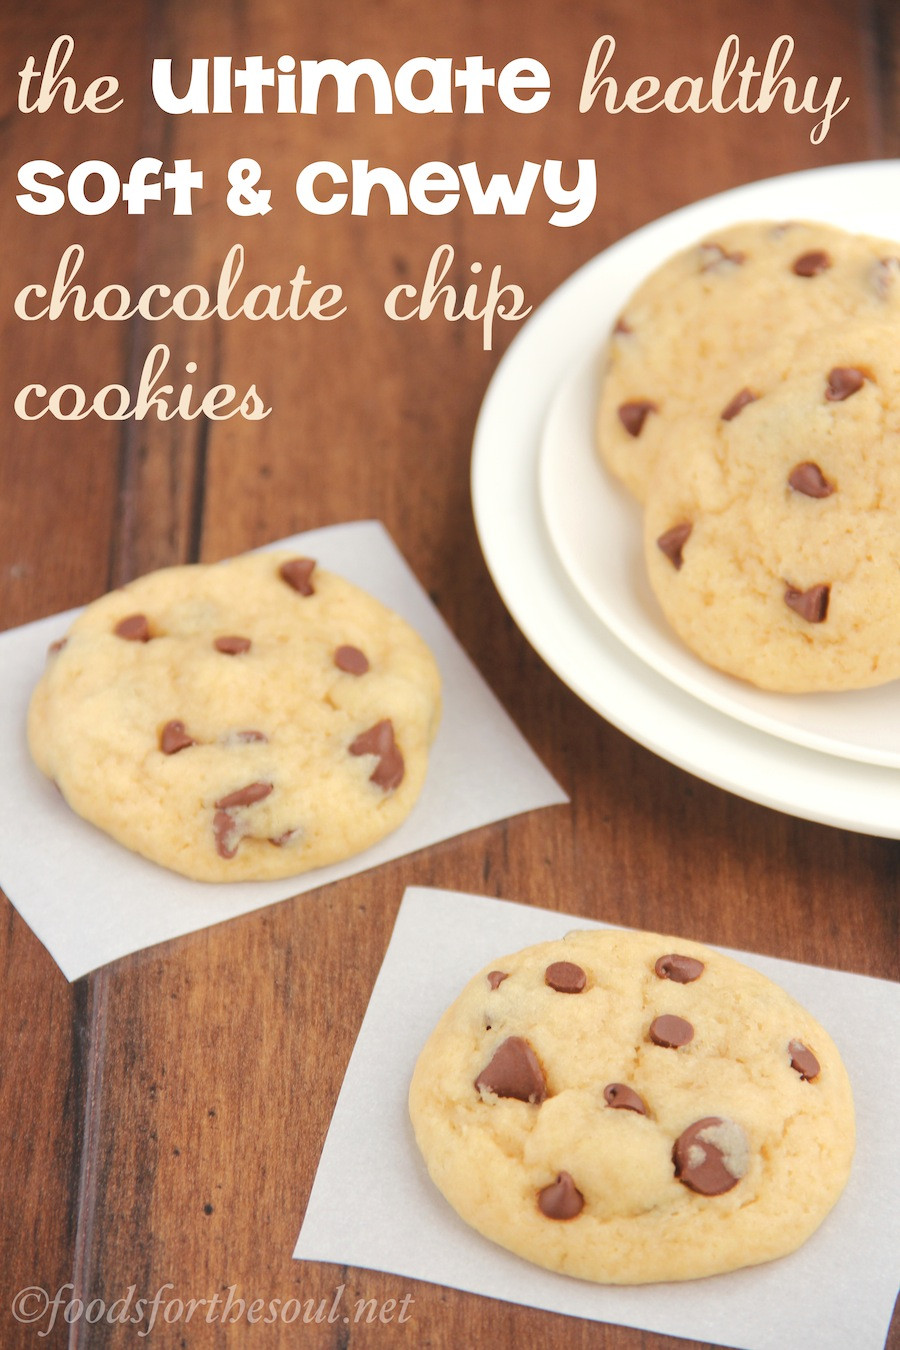 Healthy Chewy Chocolate Chip Cookies
 The Ultimate Healthy Soft & Chewy Chocolate Chip Cookies